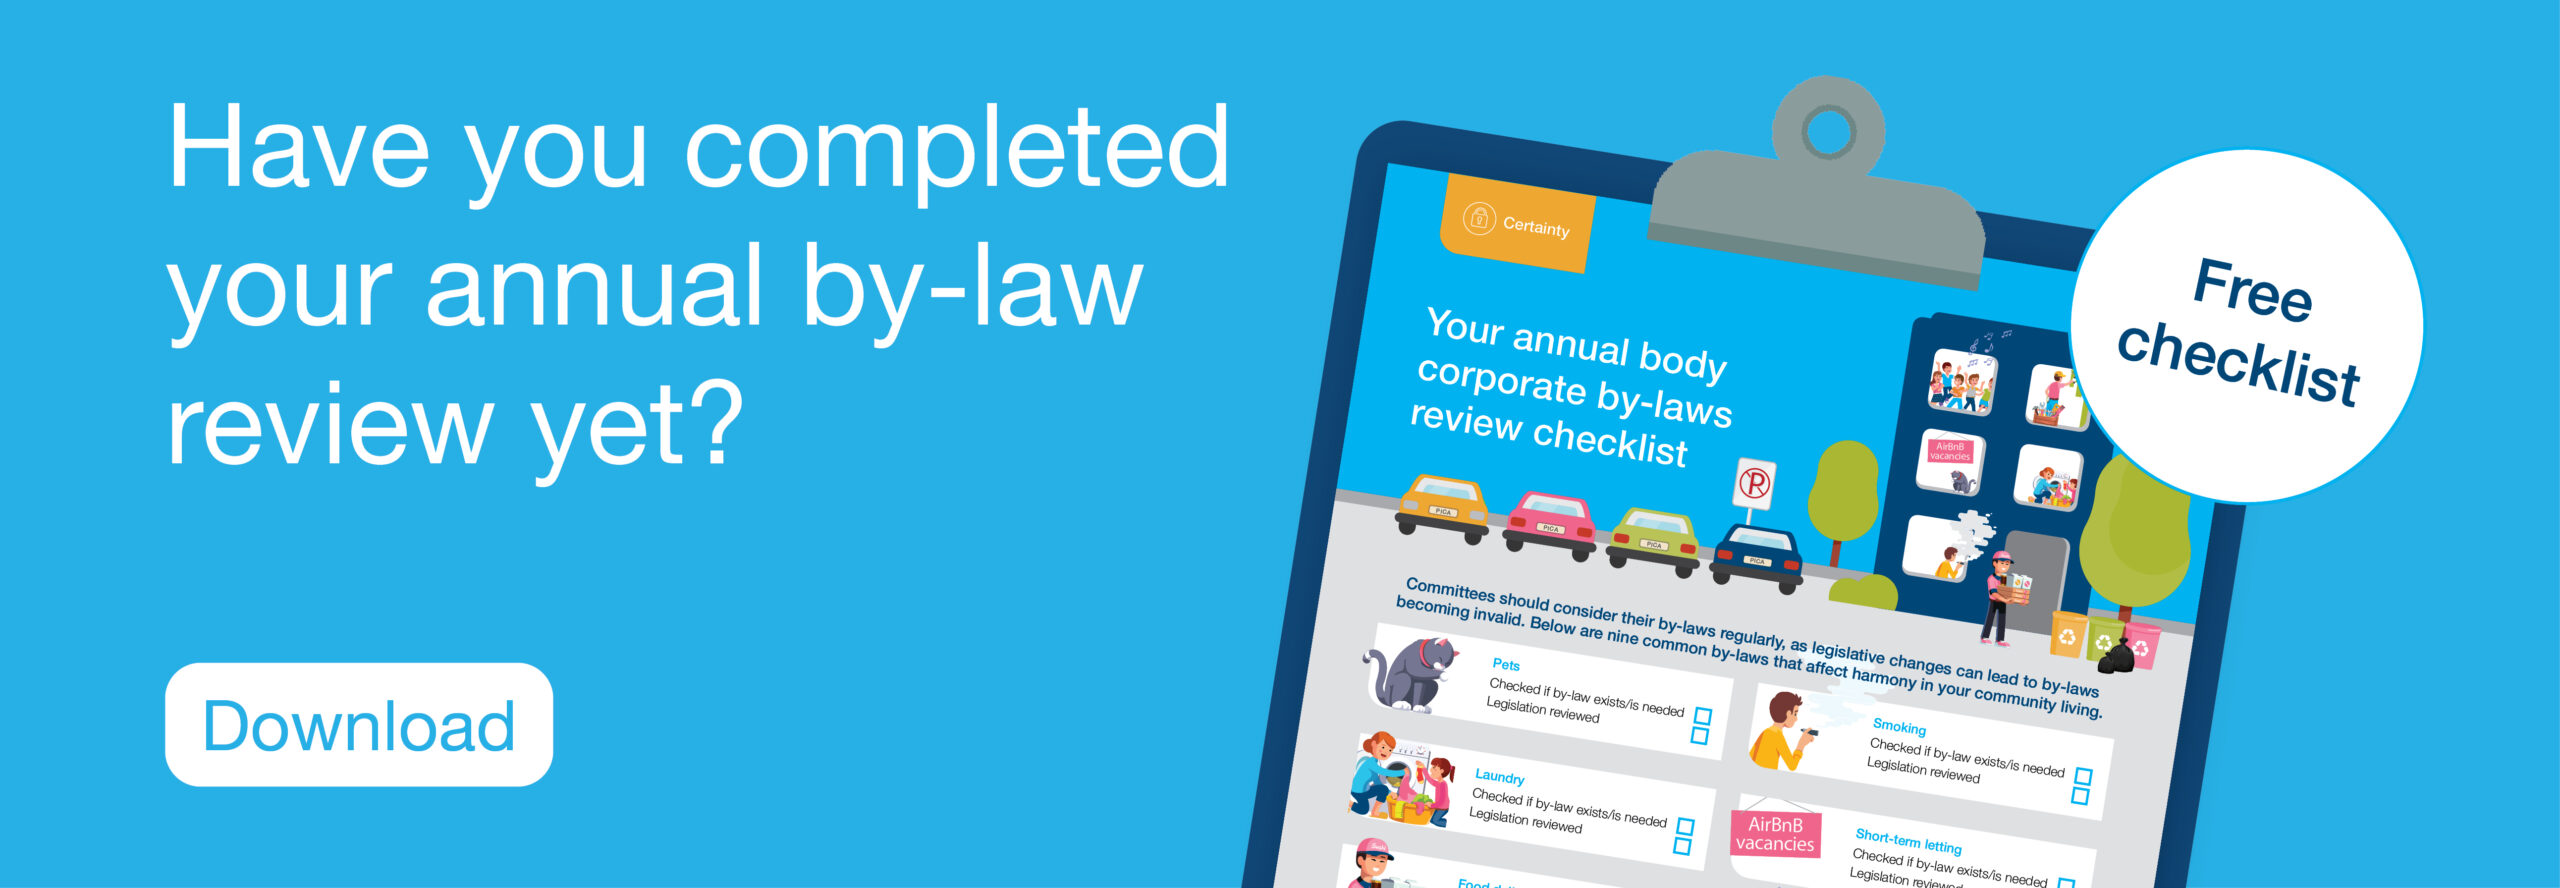 By-law review checklist promo banner